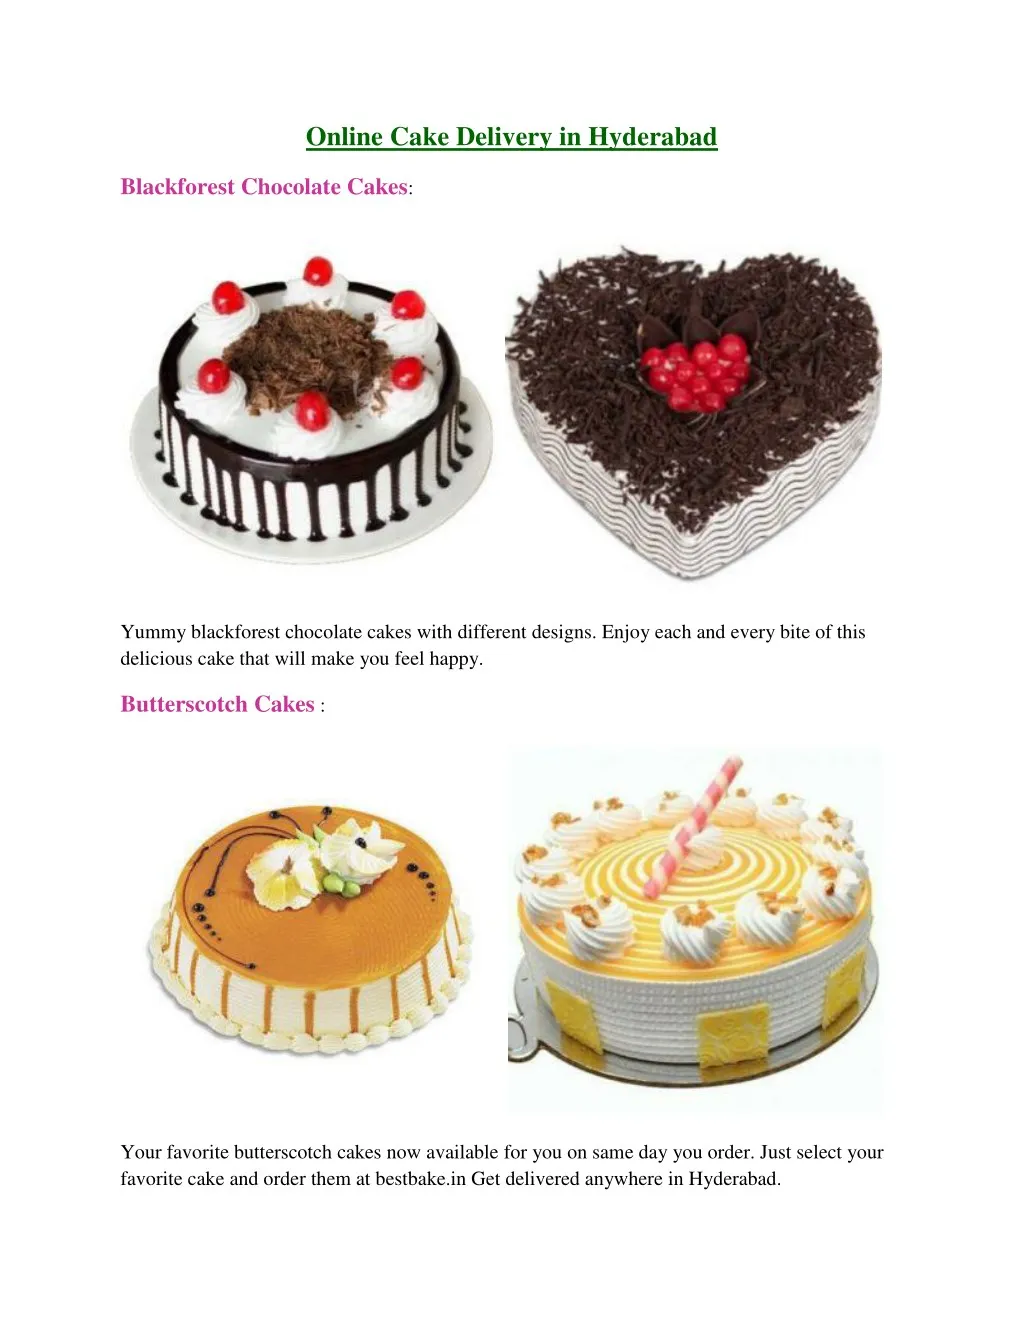 online cake delivery in hyderabad n.